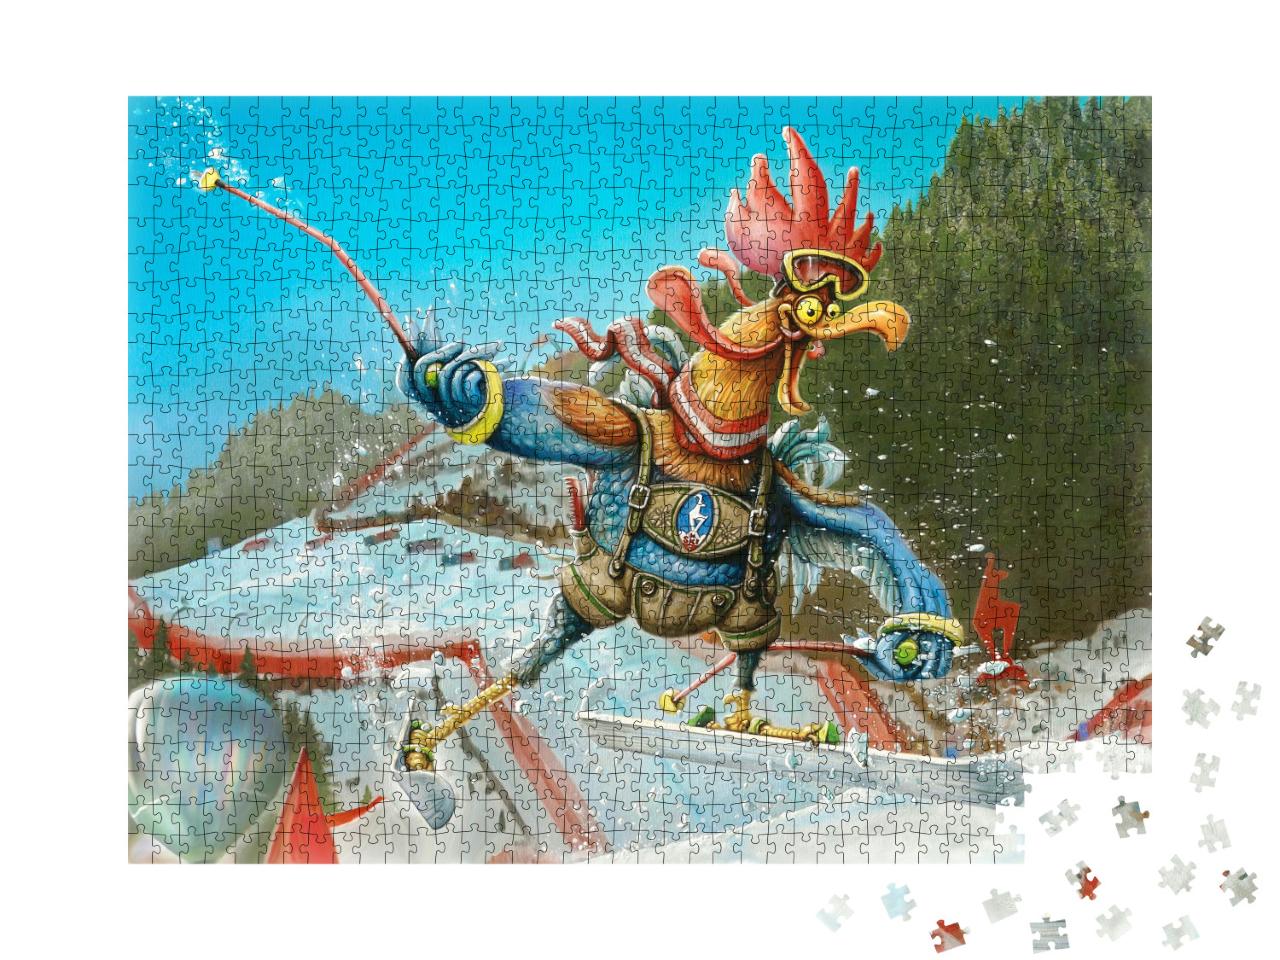 Rooster Downhill Ski Race Jigsaw Puzzle with 1000 pieces